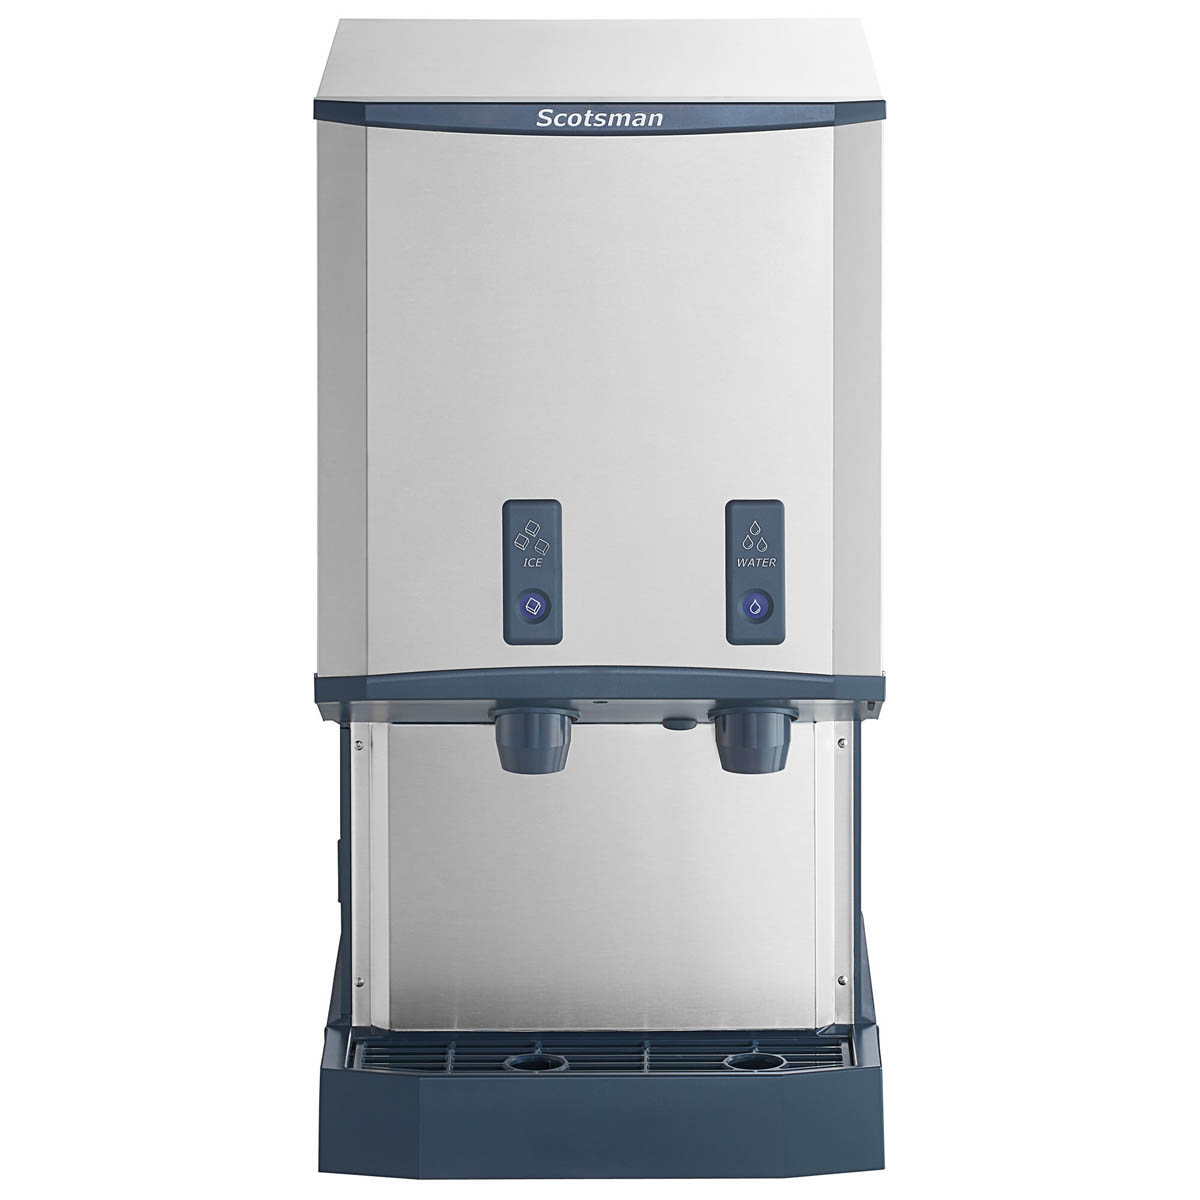 With Scotsman HID540AB-1 Touch-Free Ice & Water Dispenser, Chef's Deal